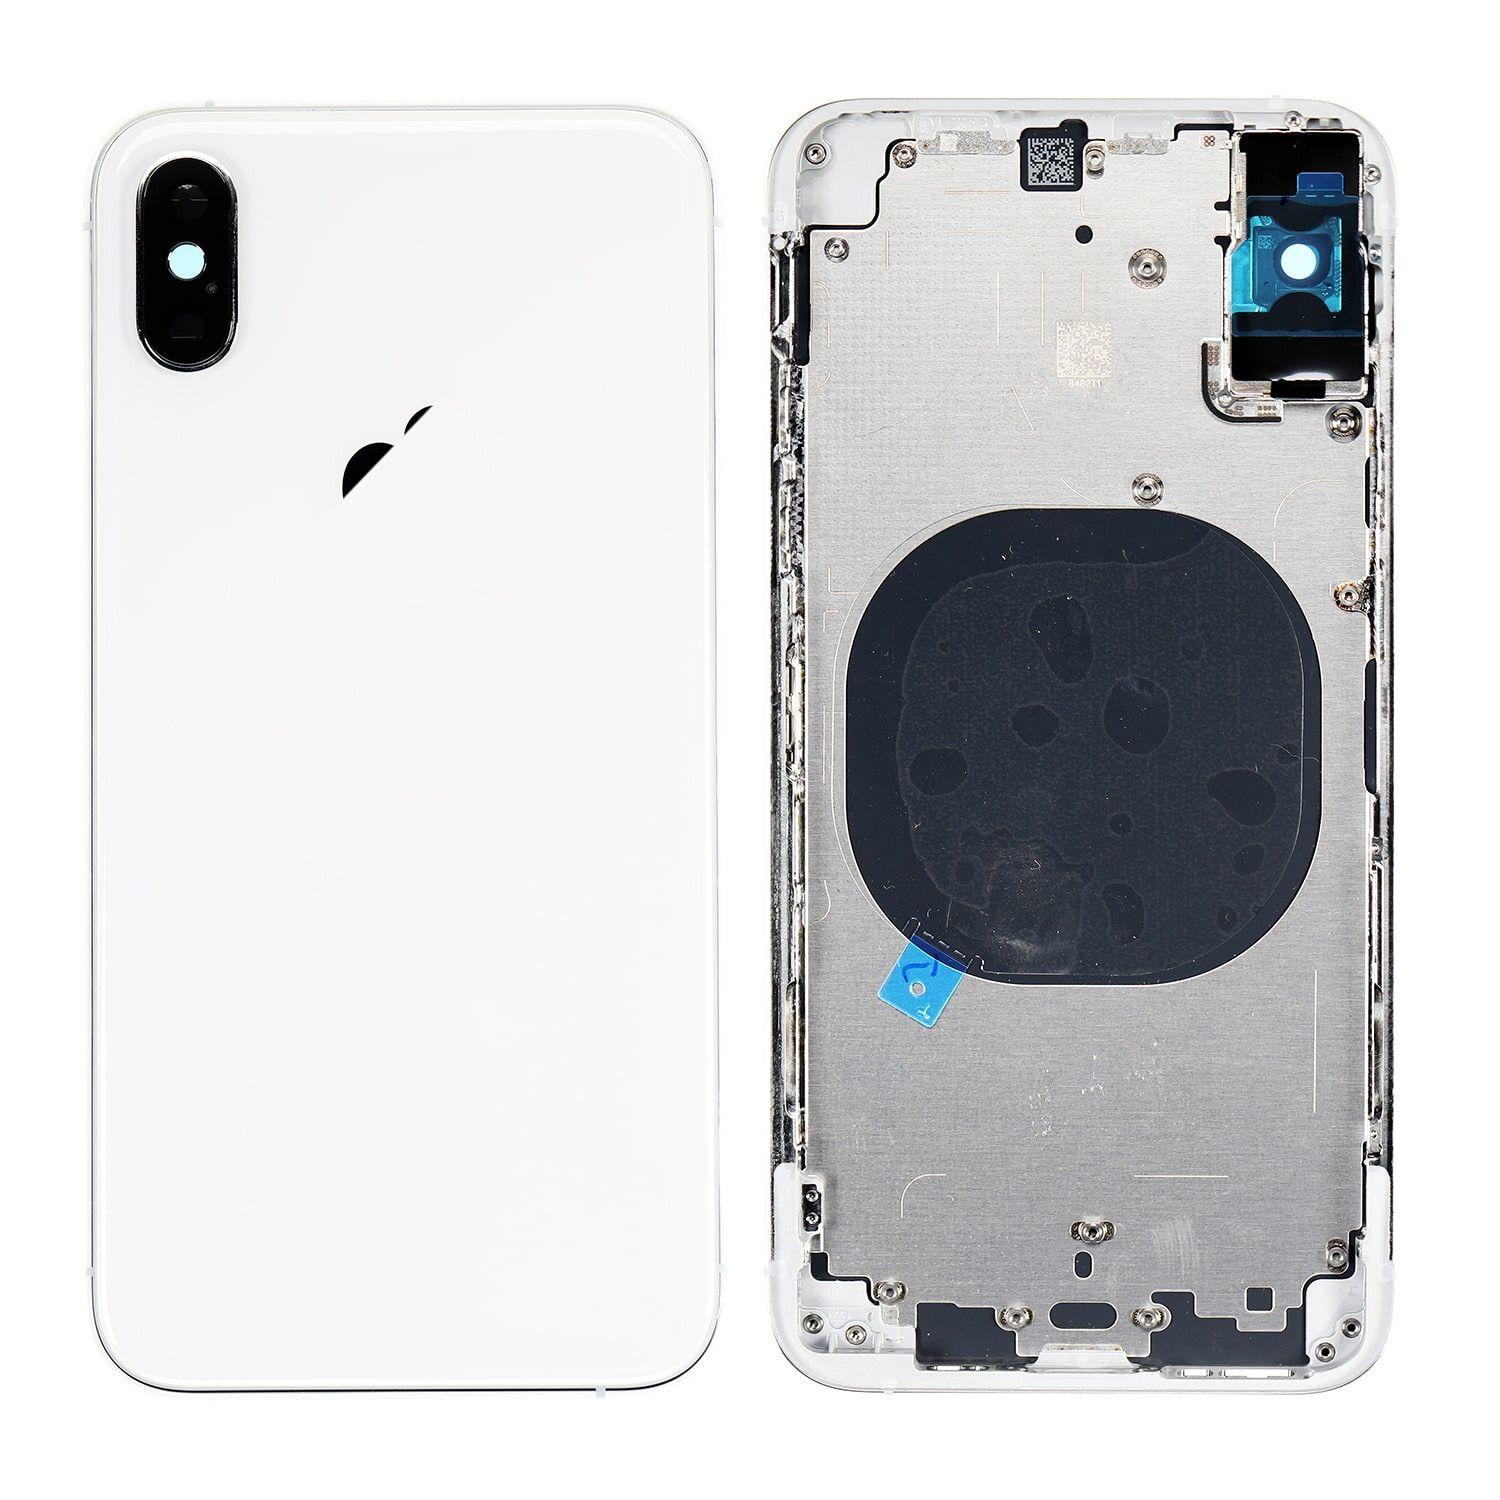 Body for iPhone Xs + back cover white